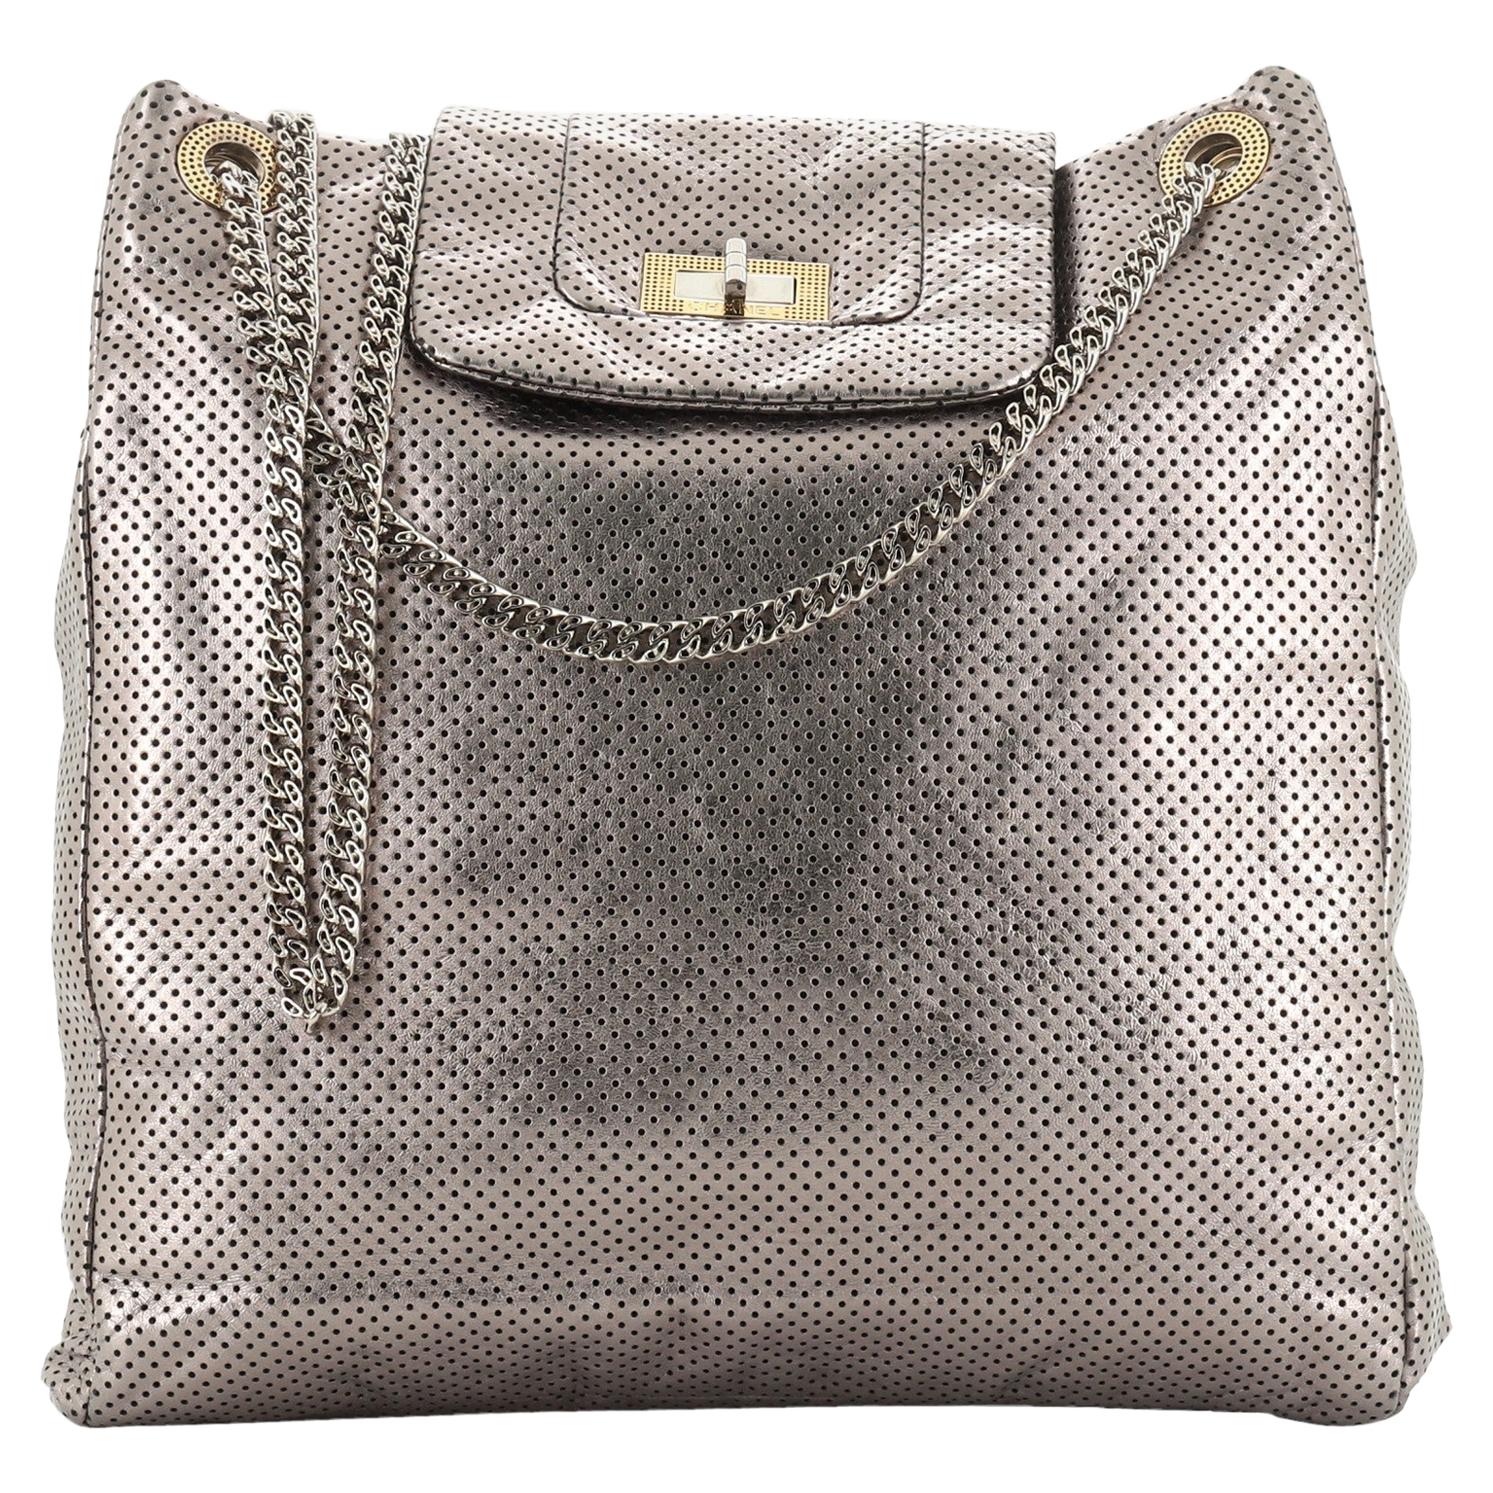 Chanel Drill Tote Perforated Leather Large